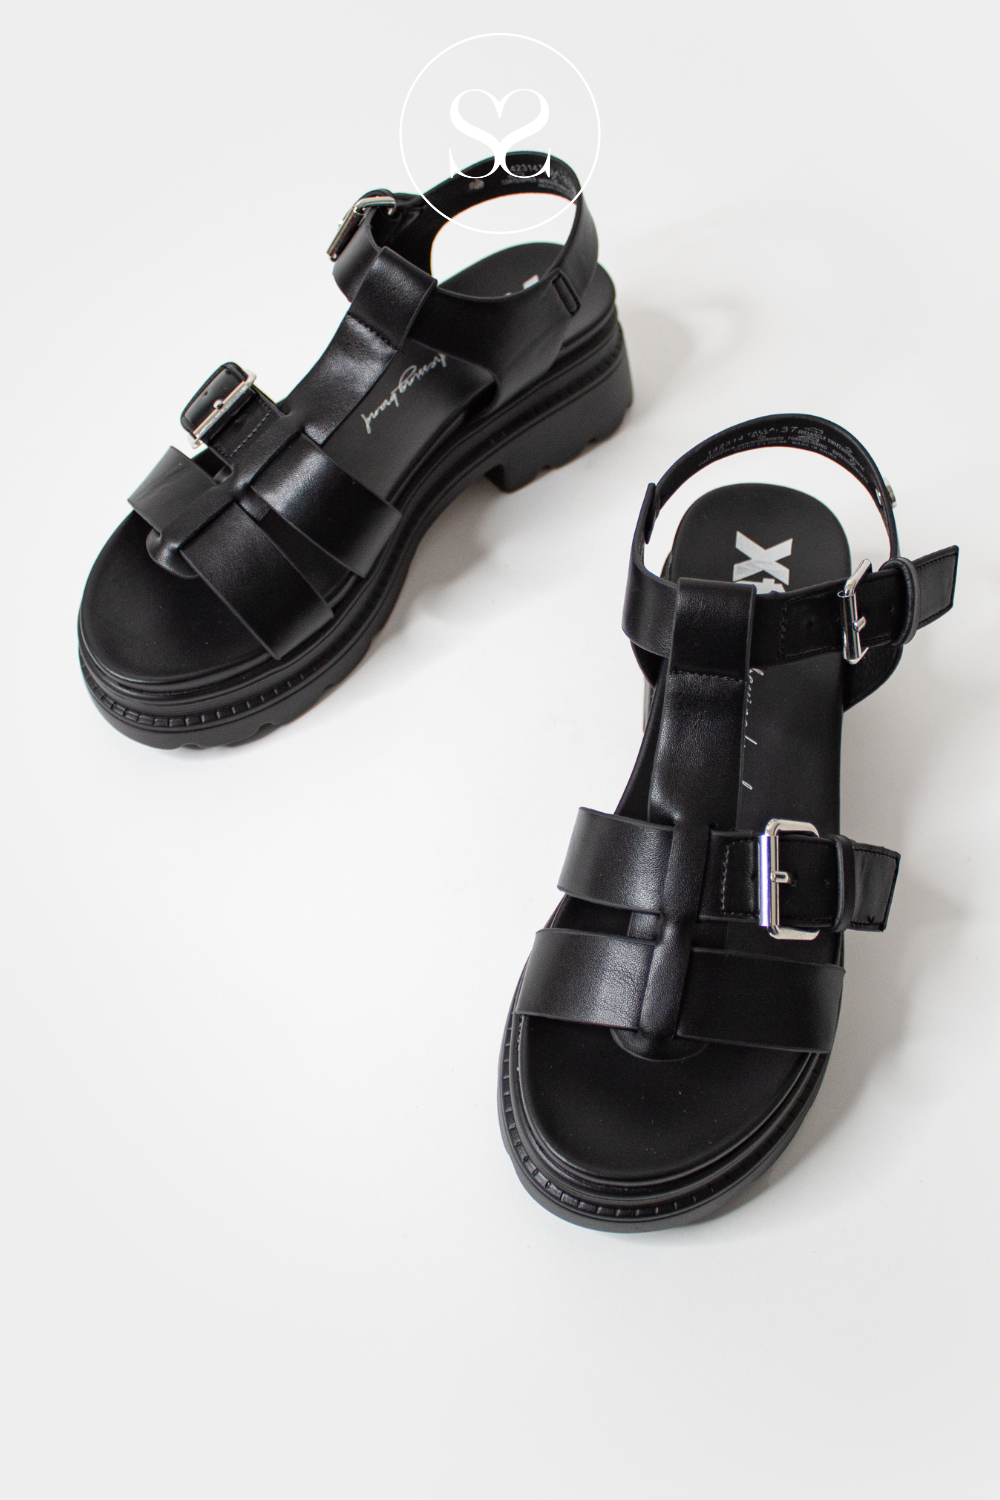 XTI 142314 BLACK CHUNKY STRAPPY SANDALS WITH SILVER BUCKLES AND ADJUSTABLE STRAPS